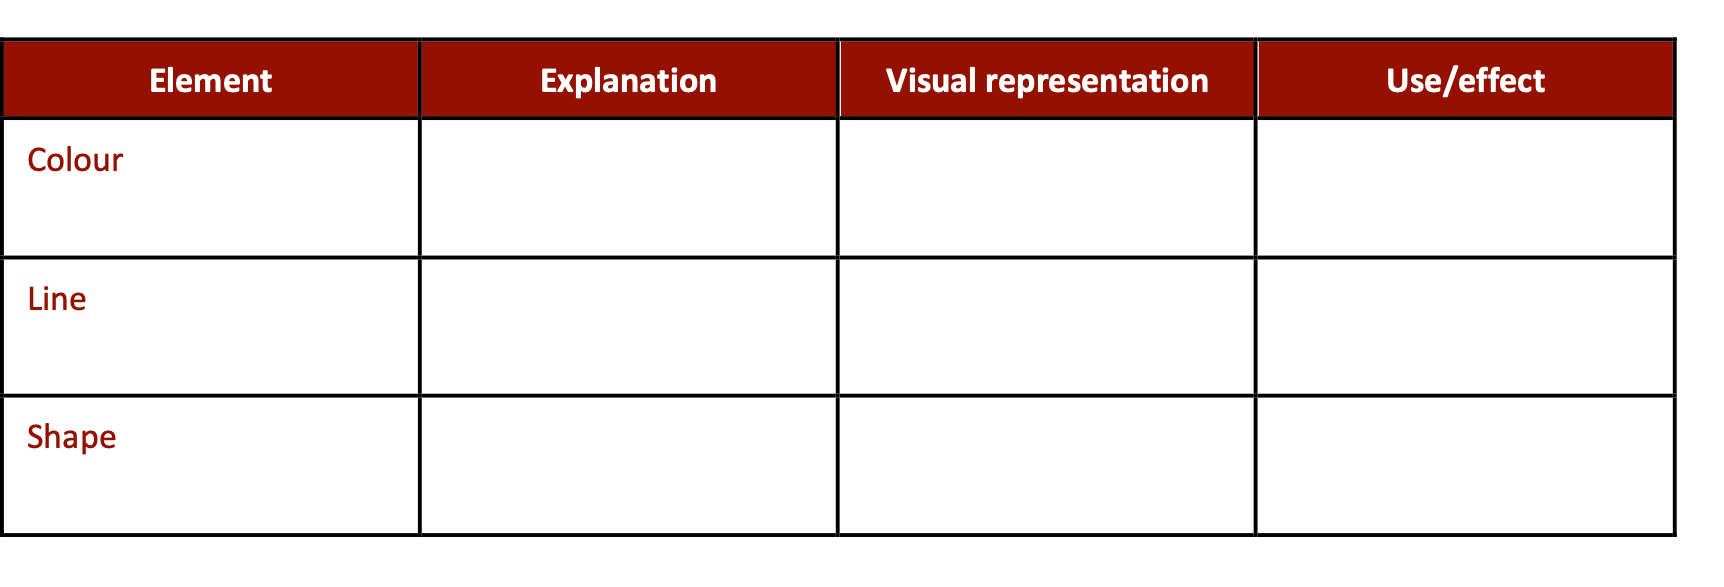 An empty table that lists three design elements: colour, line, and shape. For each principle, students must write an explanation of the term, create a visual representation of it, and describe its use and/or effect in a designed communication. 